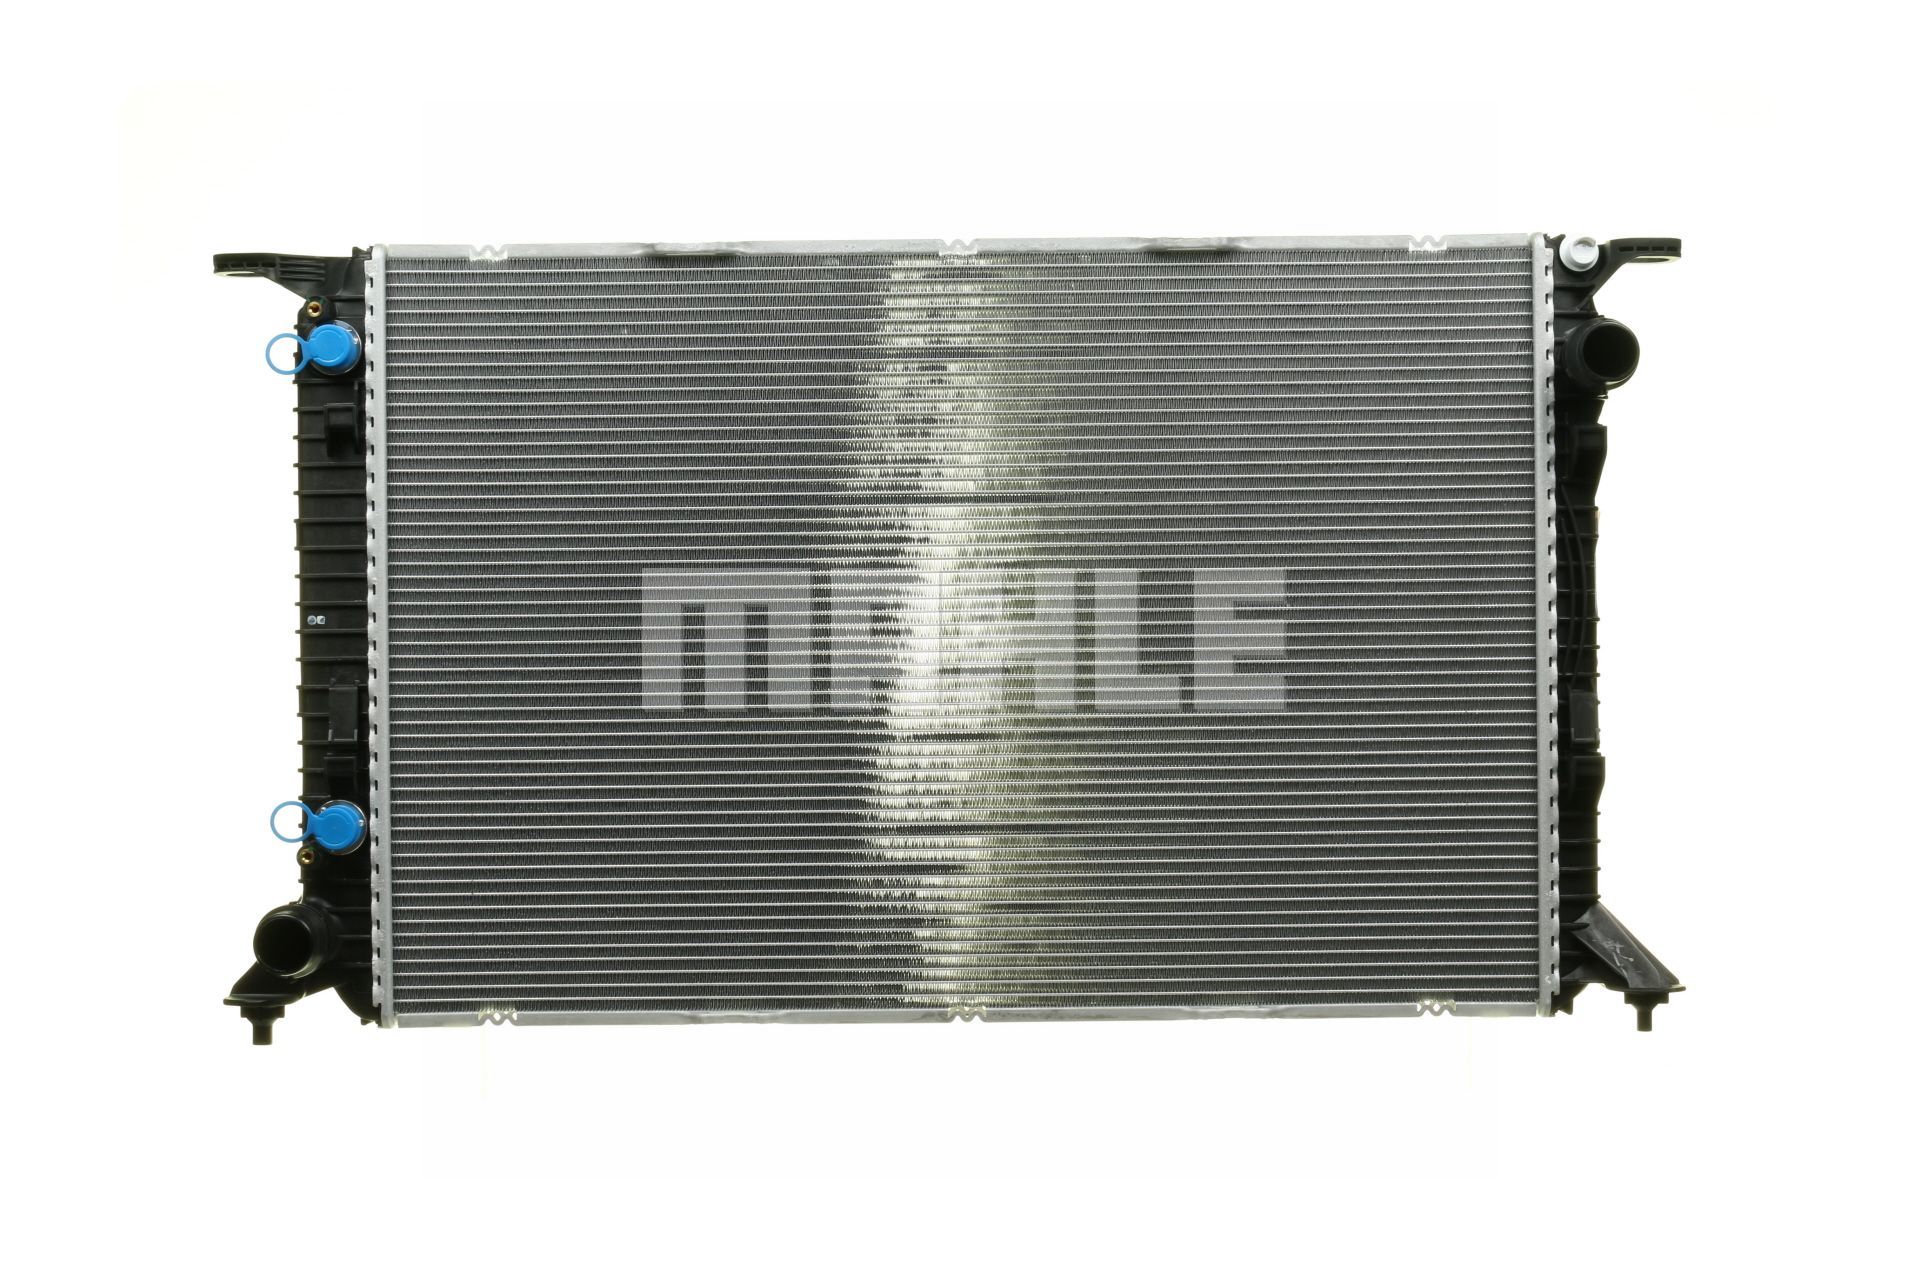 376754741 MAHLE ORIGINAL for vehicles with/without air conditioning, 720, 757 x 474 x 36 mm, Automatic Transmission, Brazed cooling fins Radiator CR 1133 000P buy